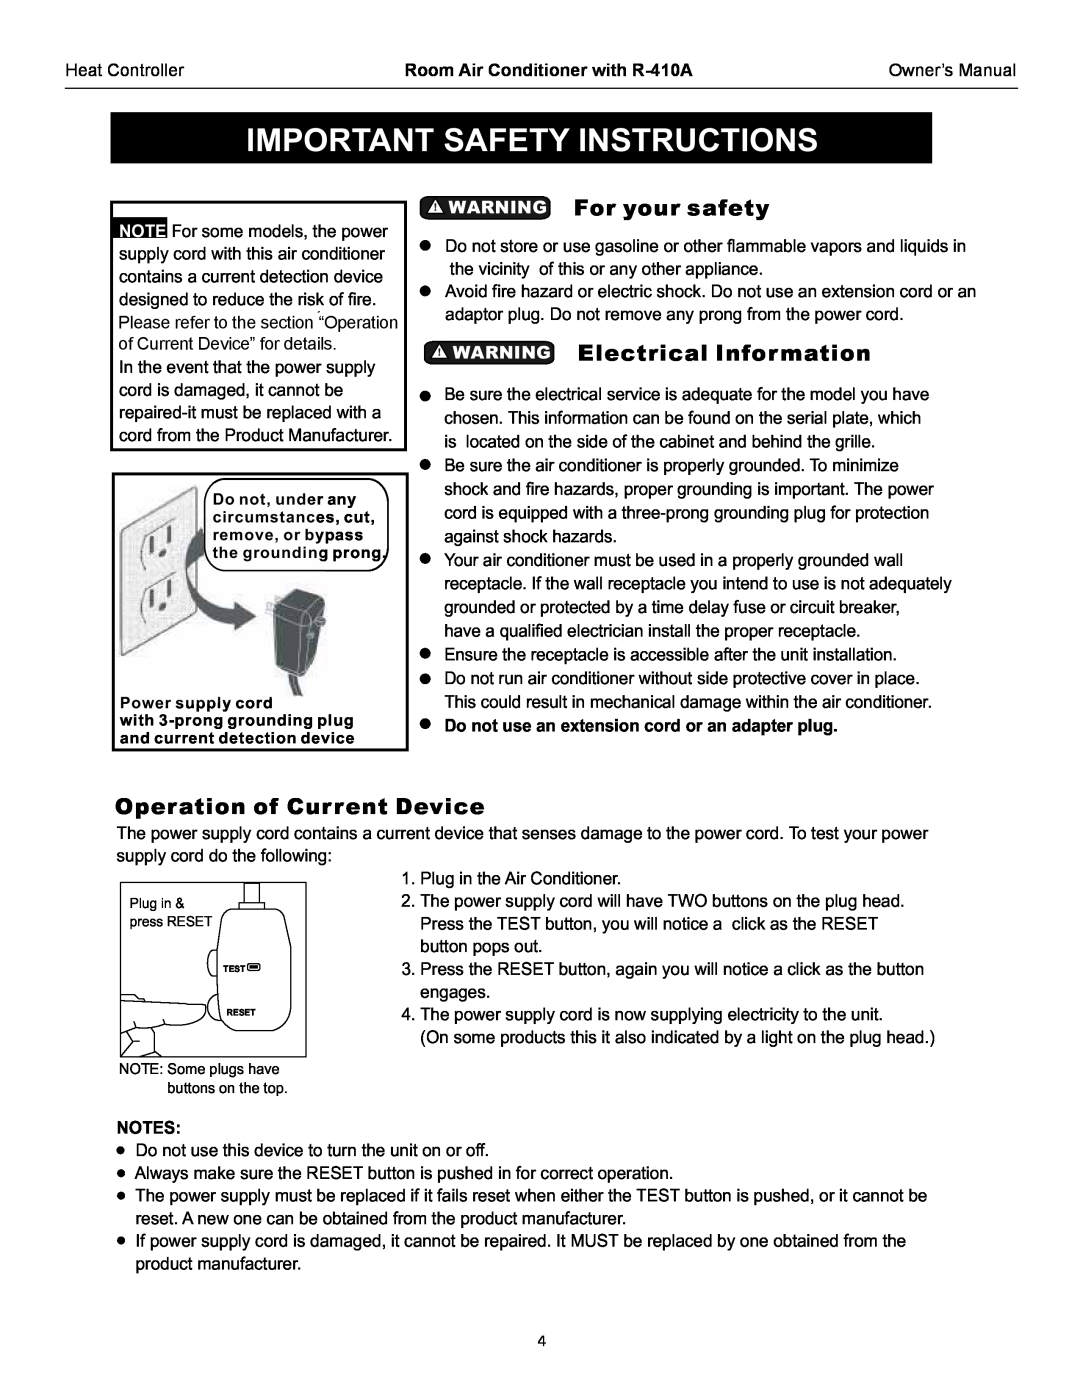 Heat Controller CD-121L manual Importantsafety Instructions, Donotuseanextensioncordoranadapterplug, WARNING Foryoursafety 